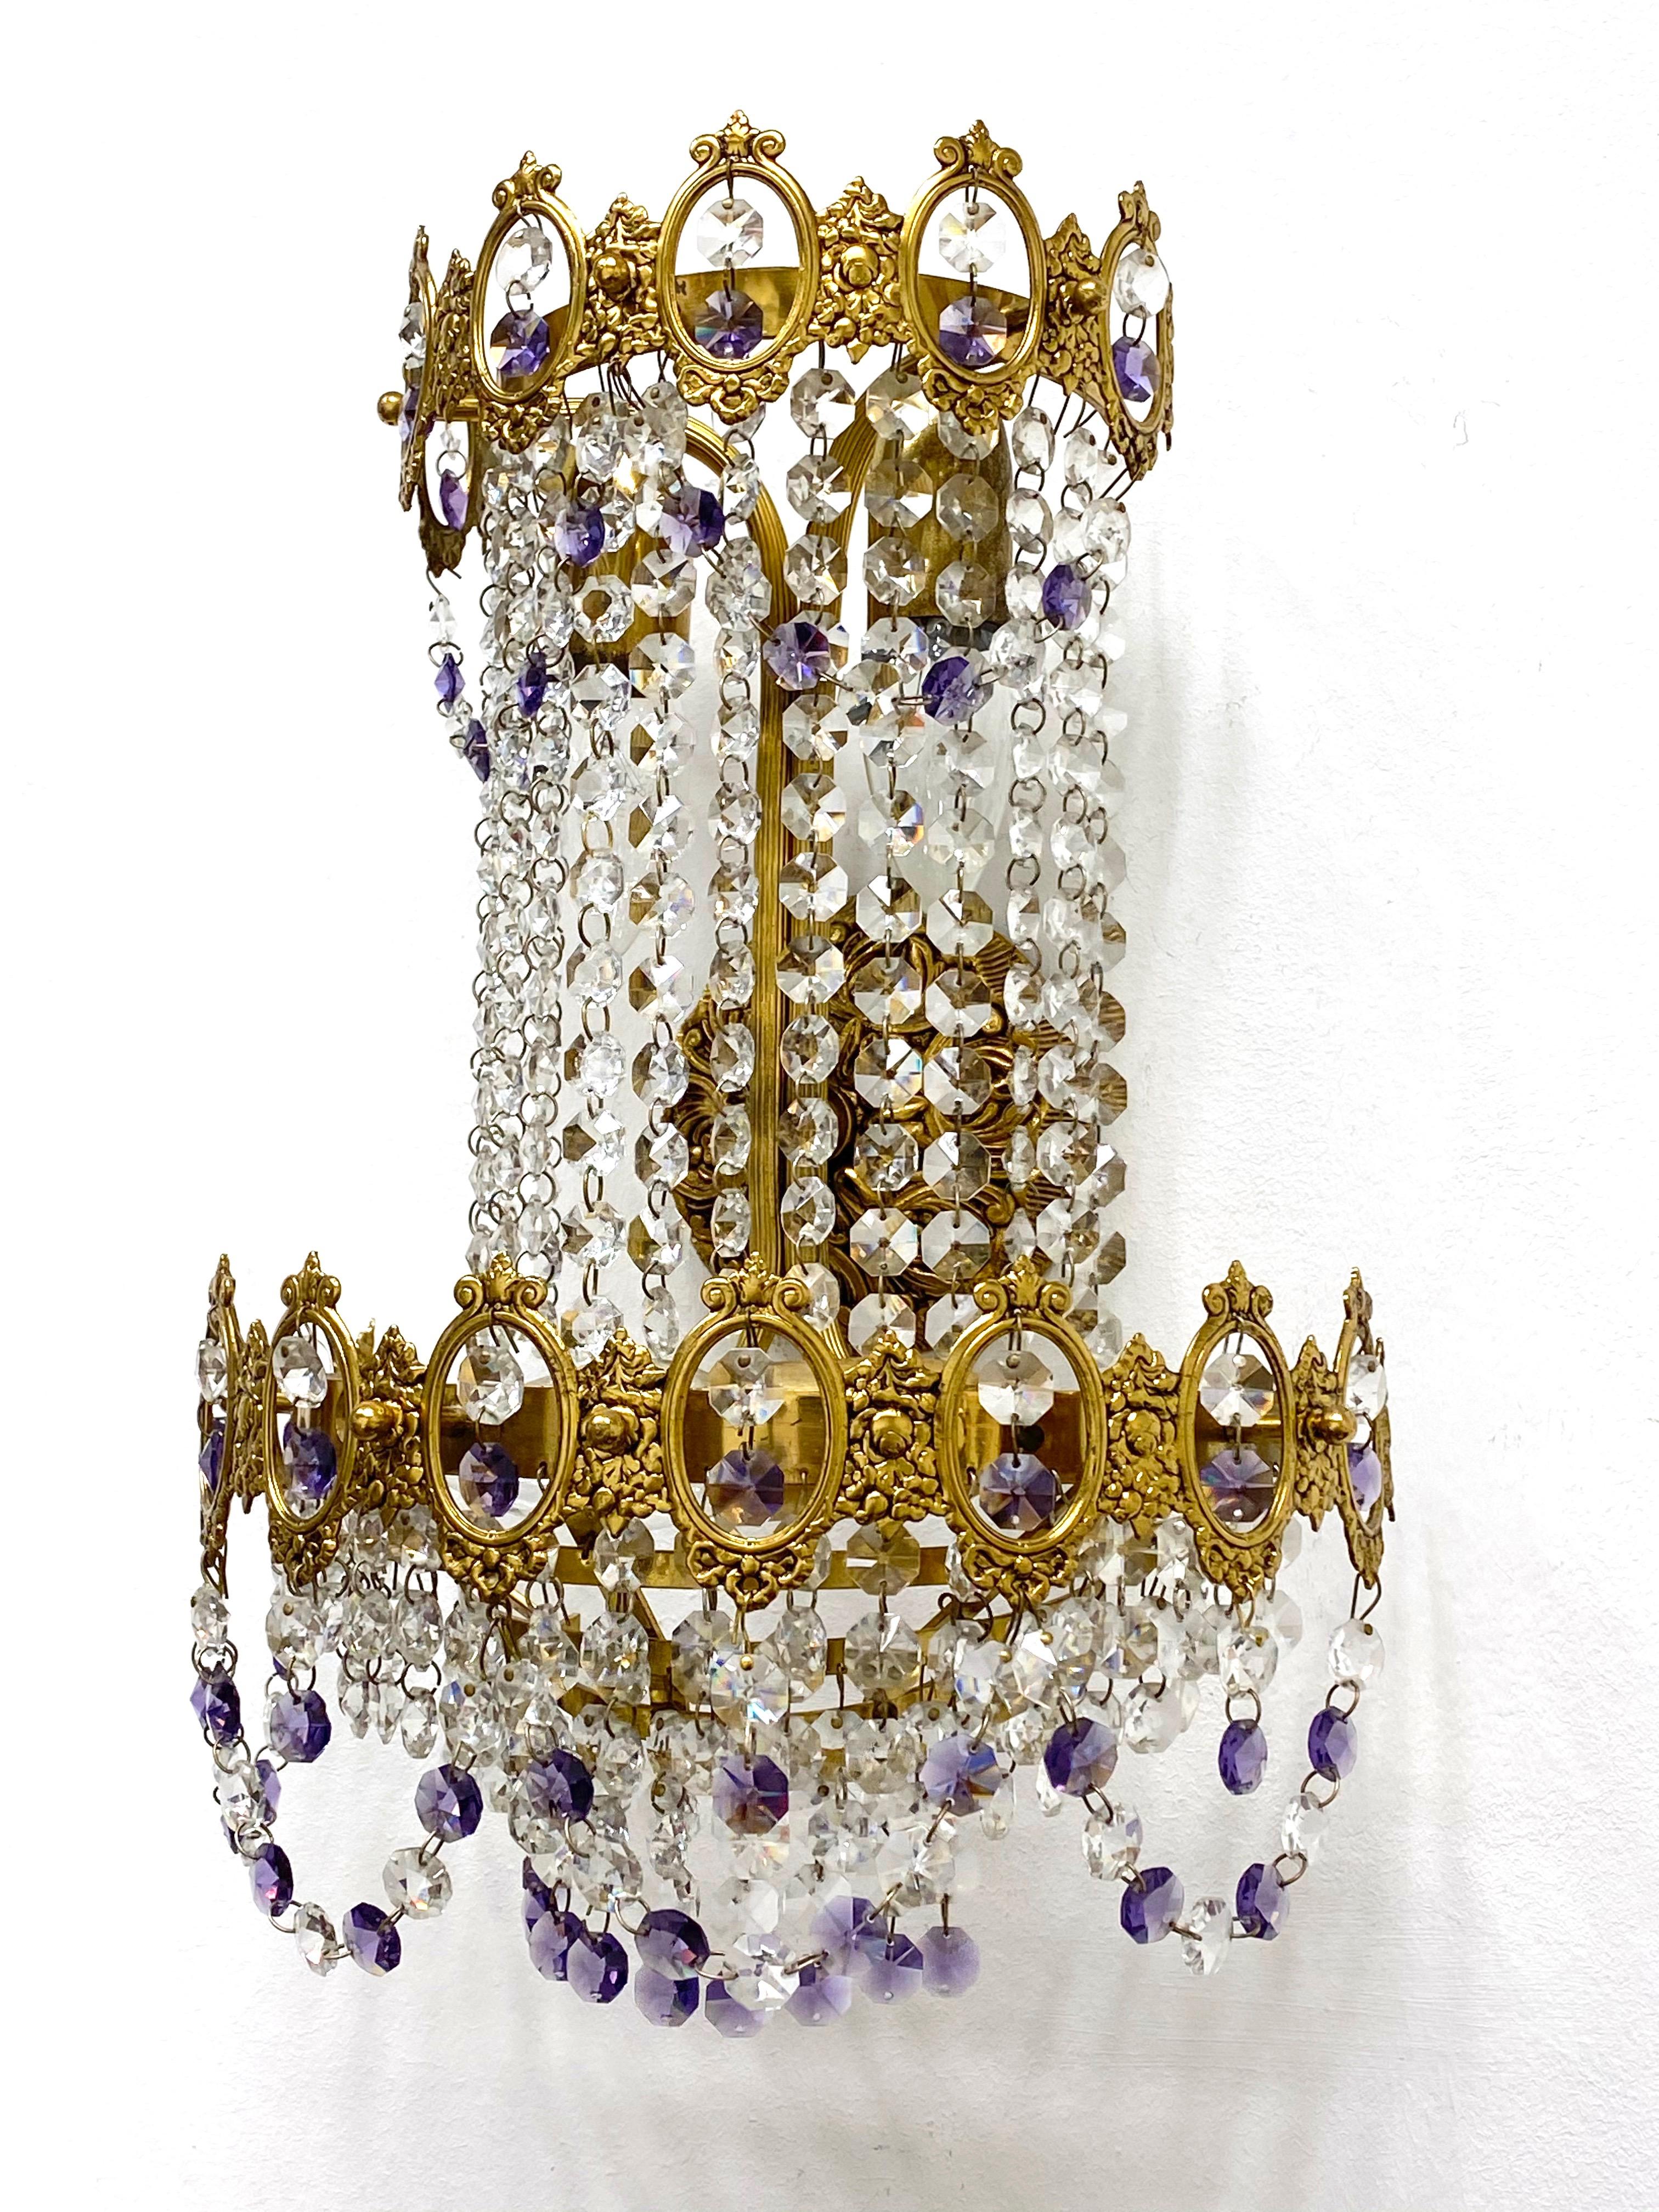 Gilt Pair of Monumental Empire Style Crystal and Bronze Sconces, Austria, 1930s For Sale